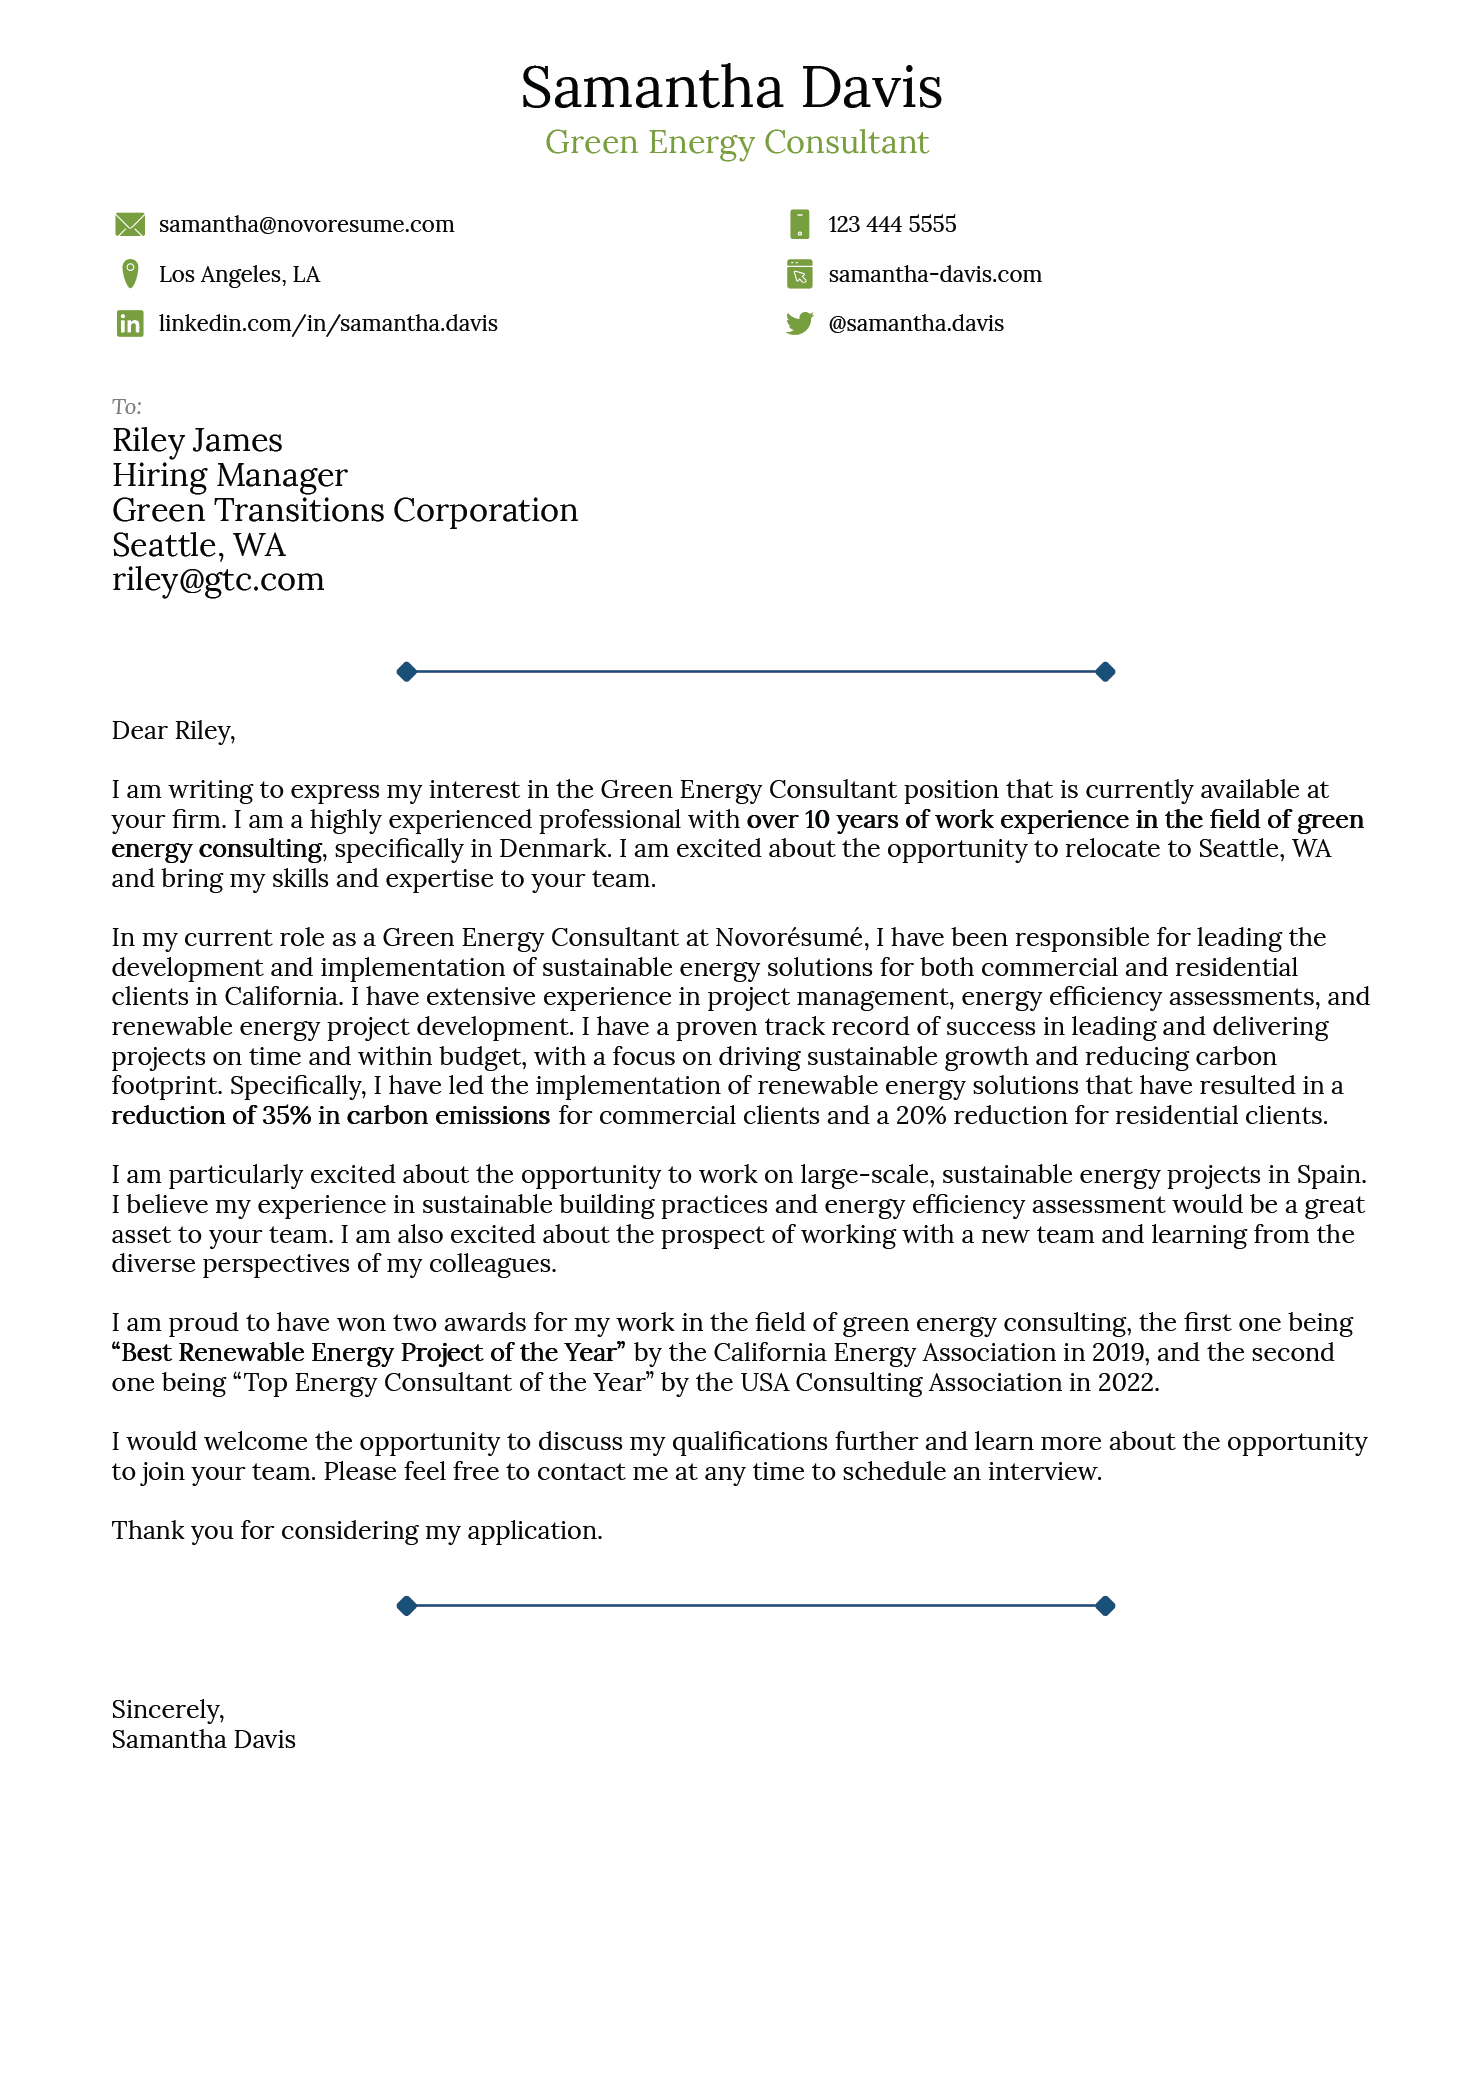 Minimalist Cover Letter Template